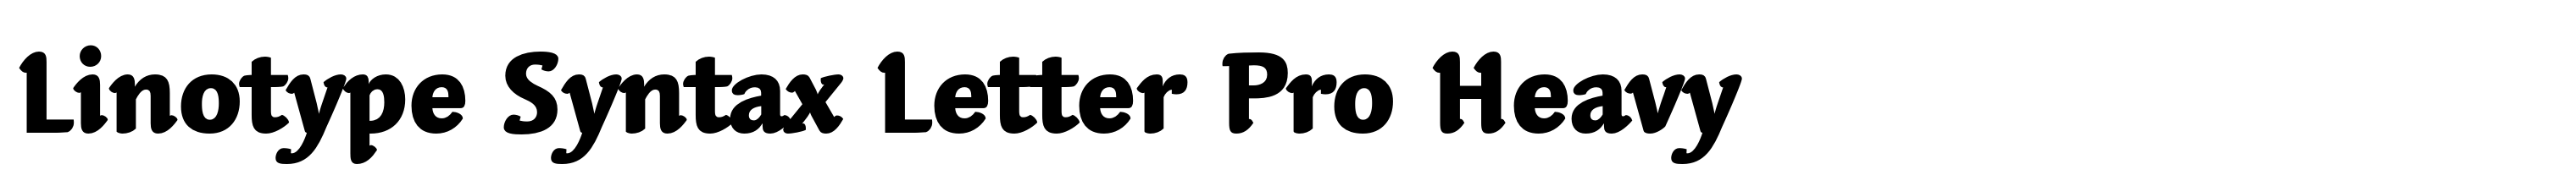 Linotype Syntax Letter Pro Heavy